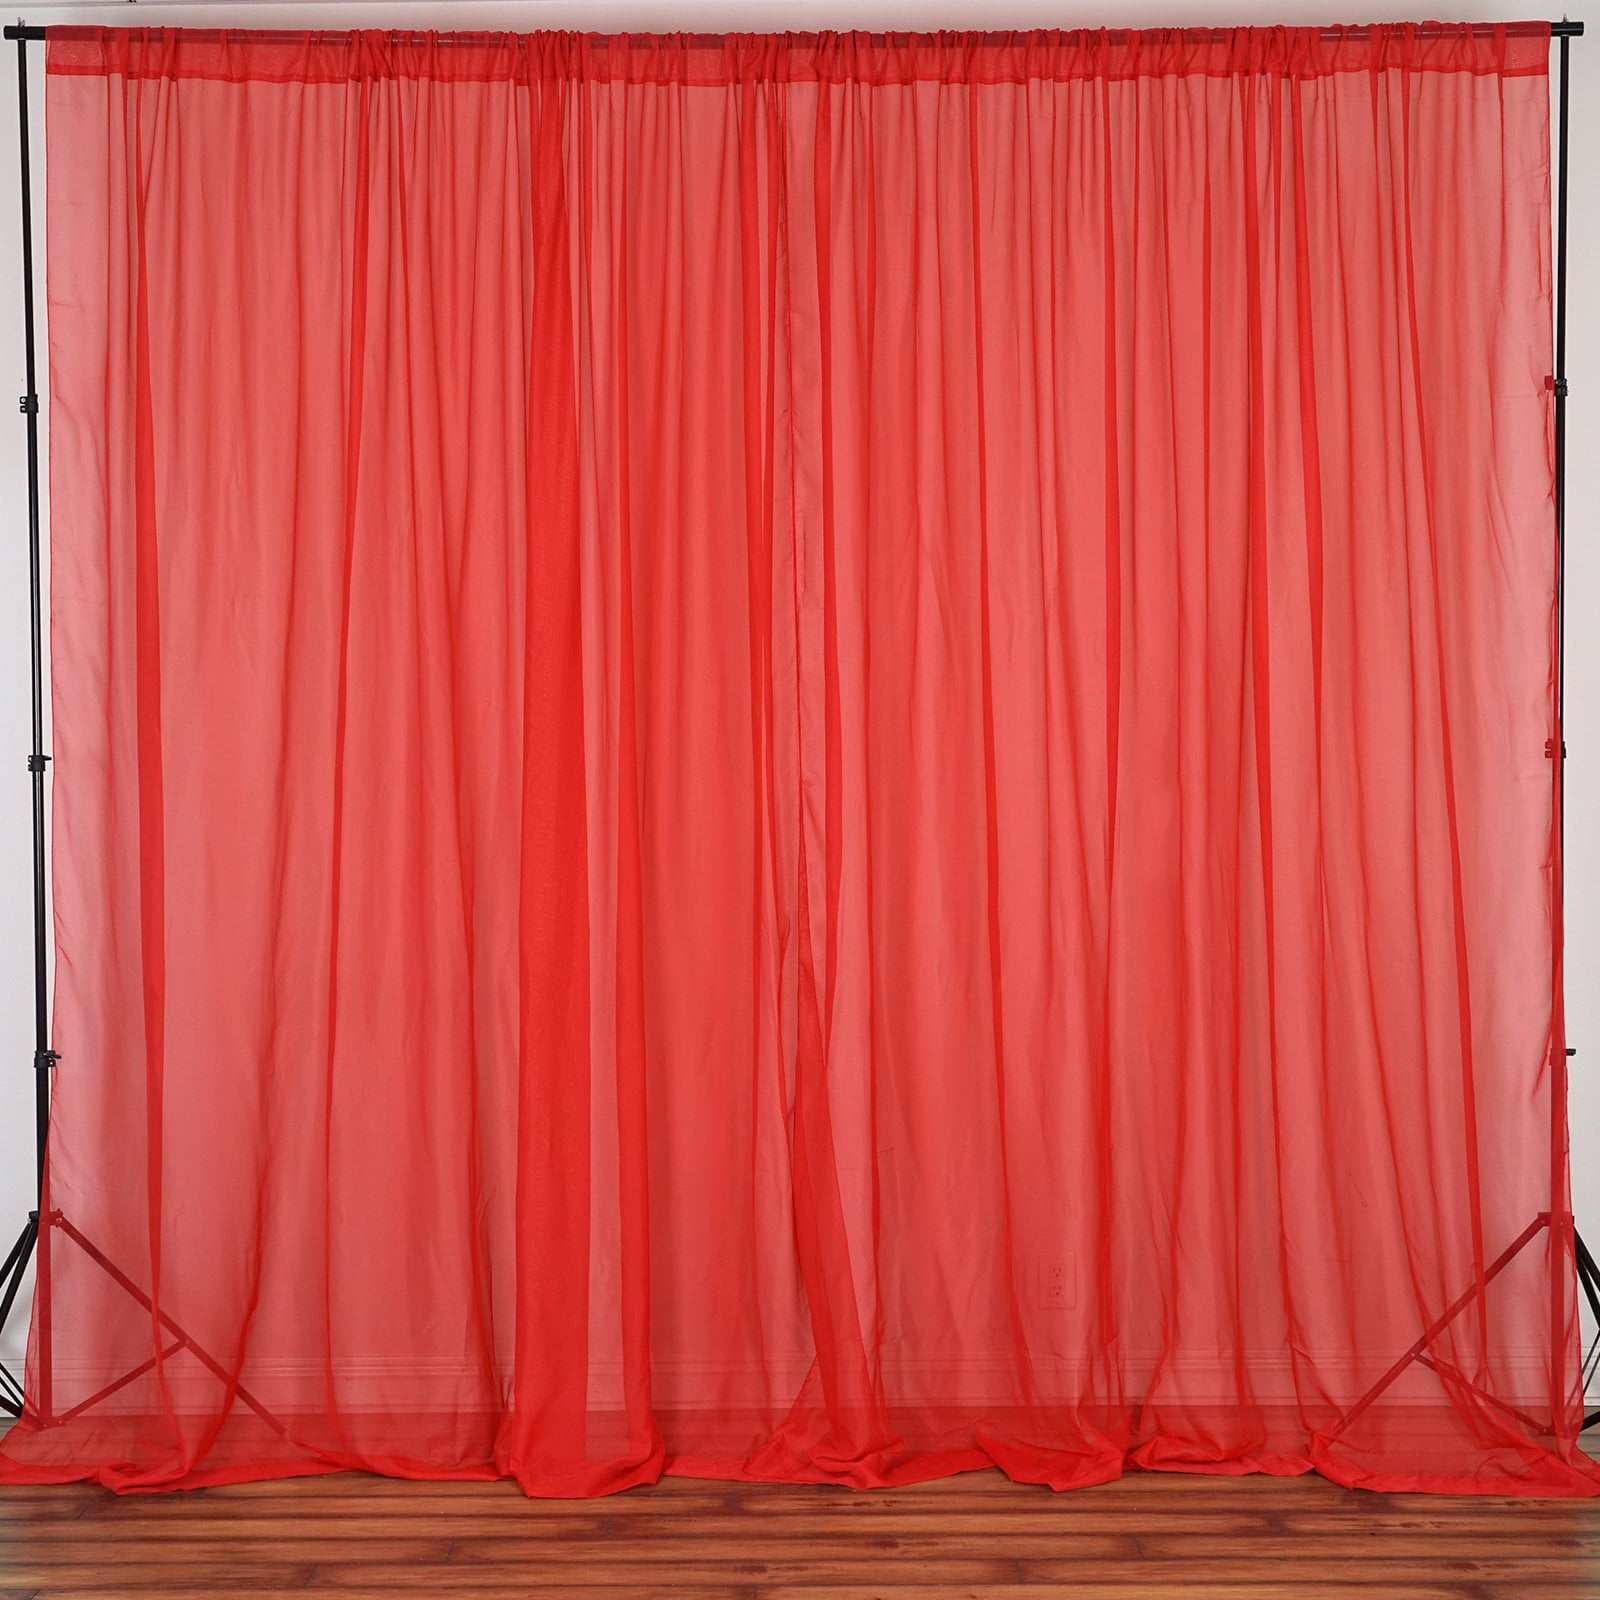 10x10 wedding backdrop curtain swag Curtain Lights Stand Kit 